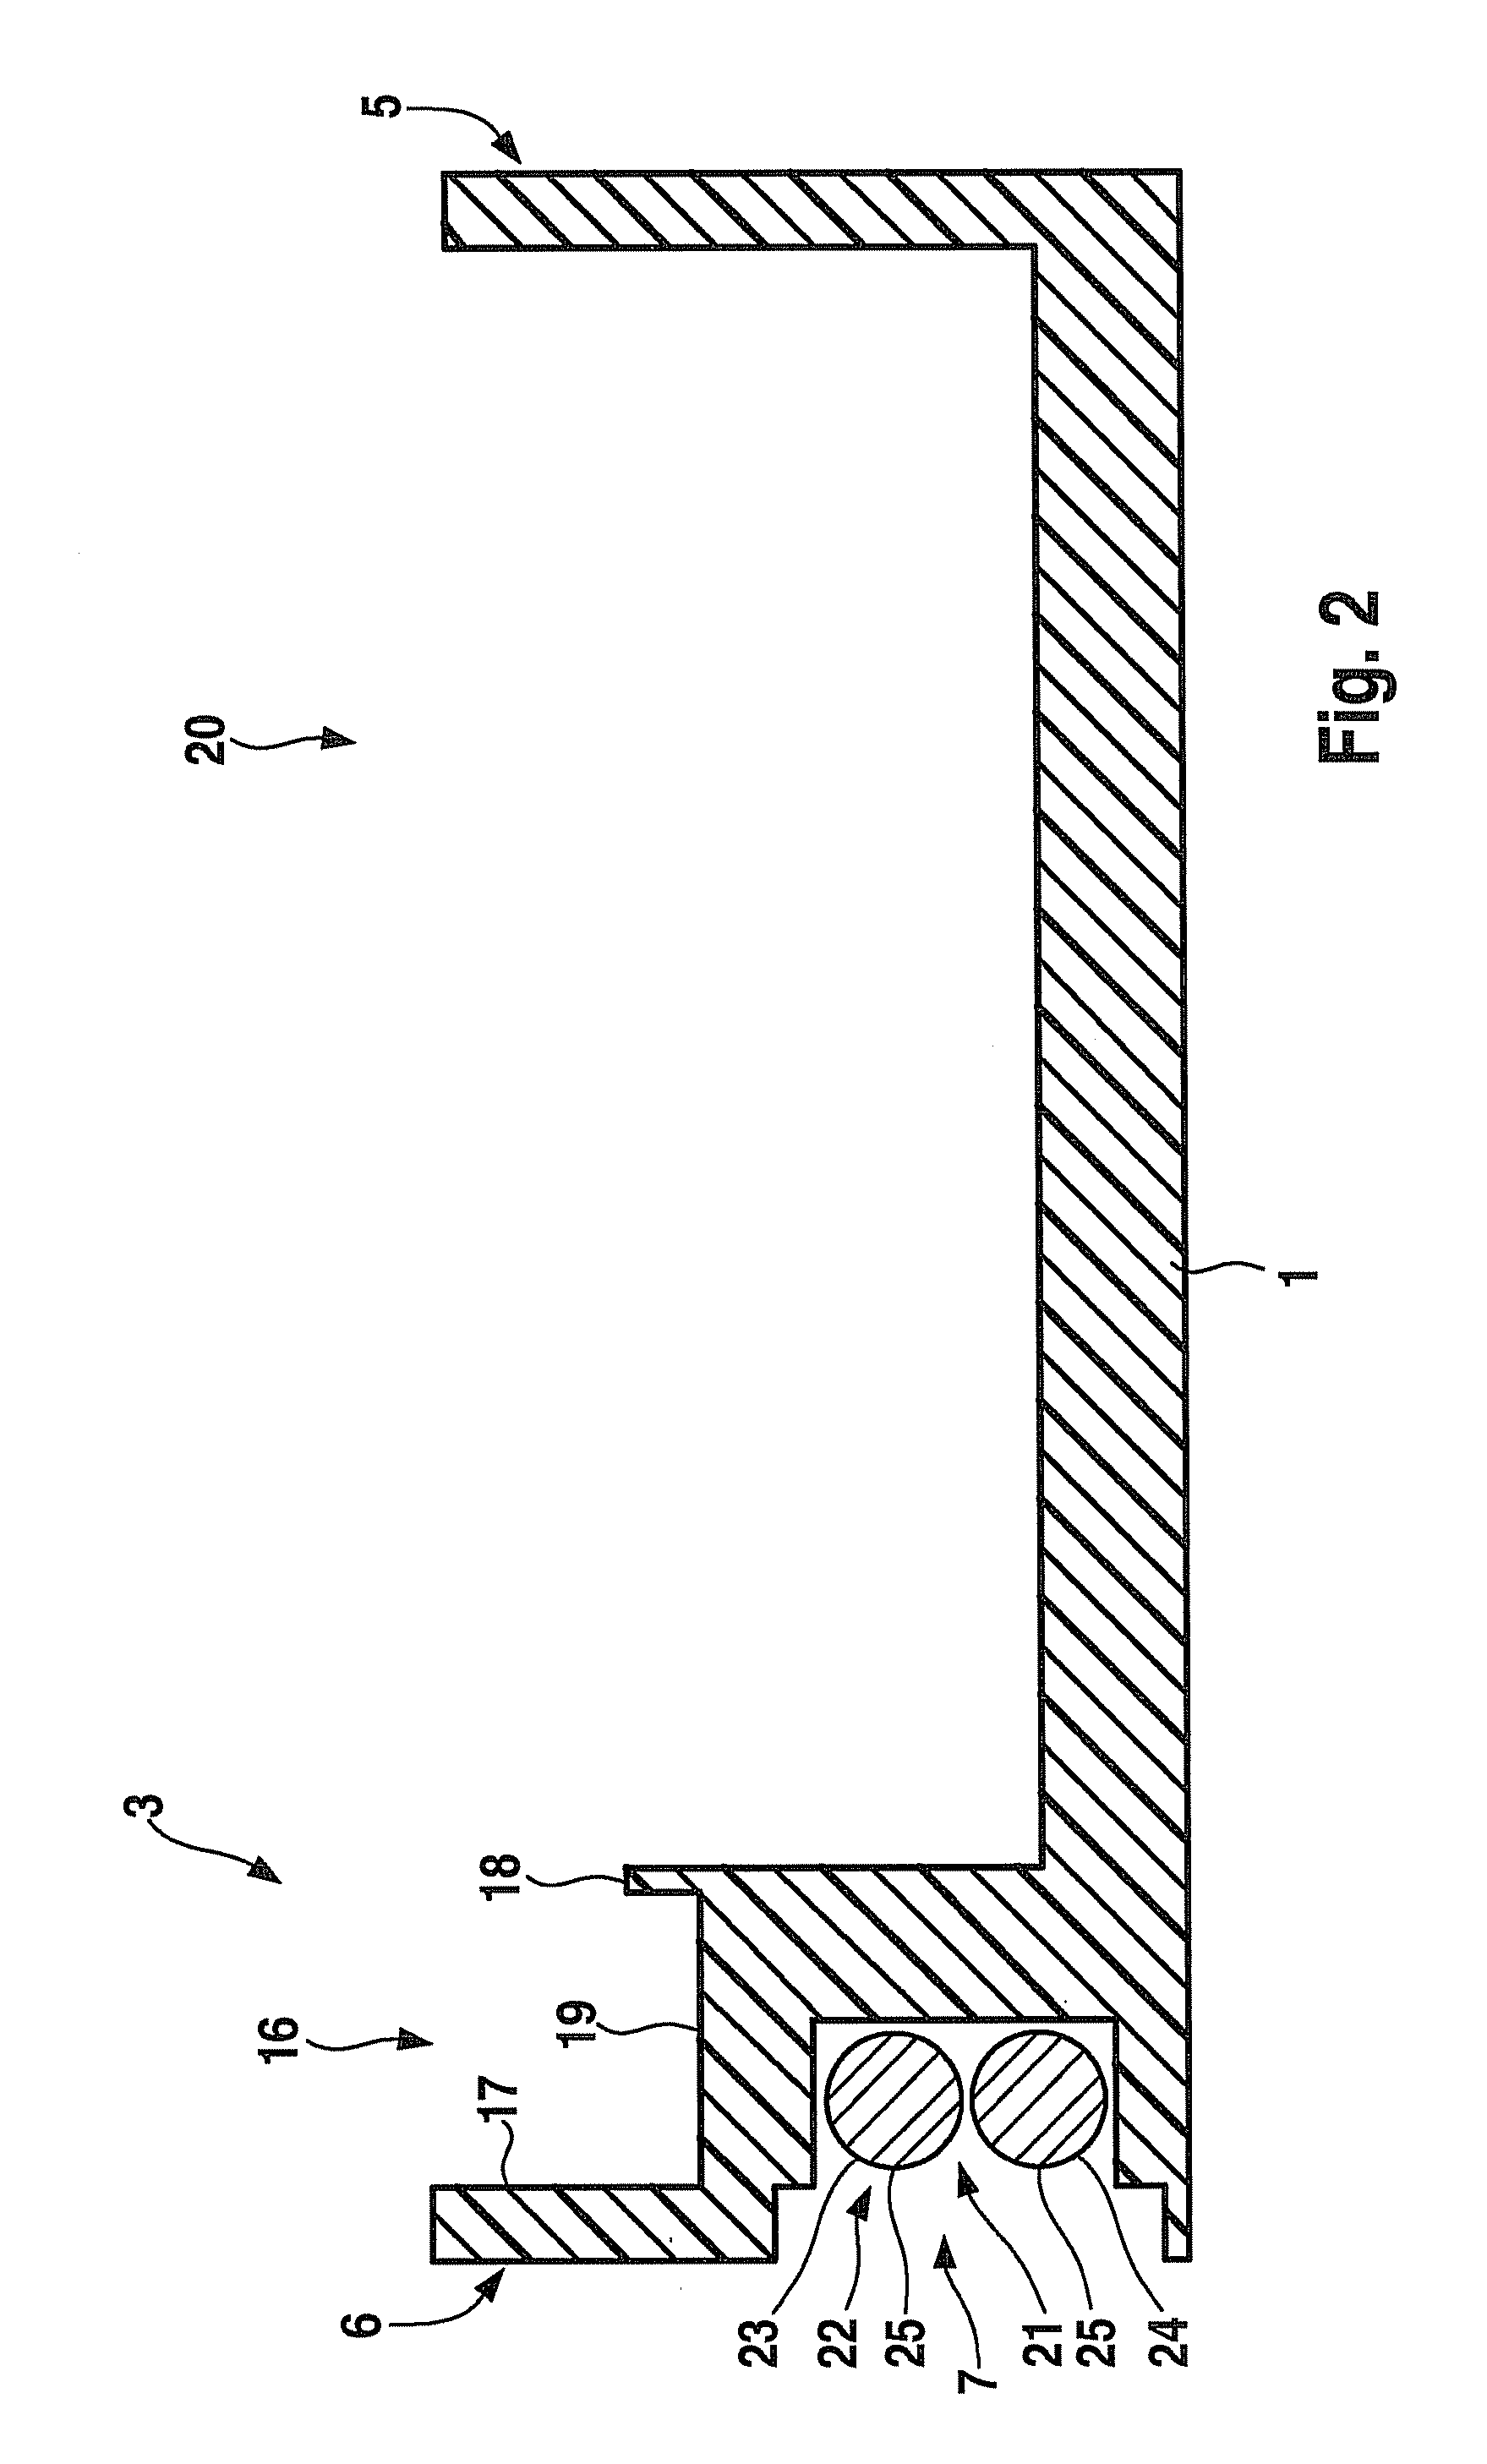 Coil configuration having a coil brace of an electromagnetic drive